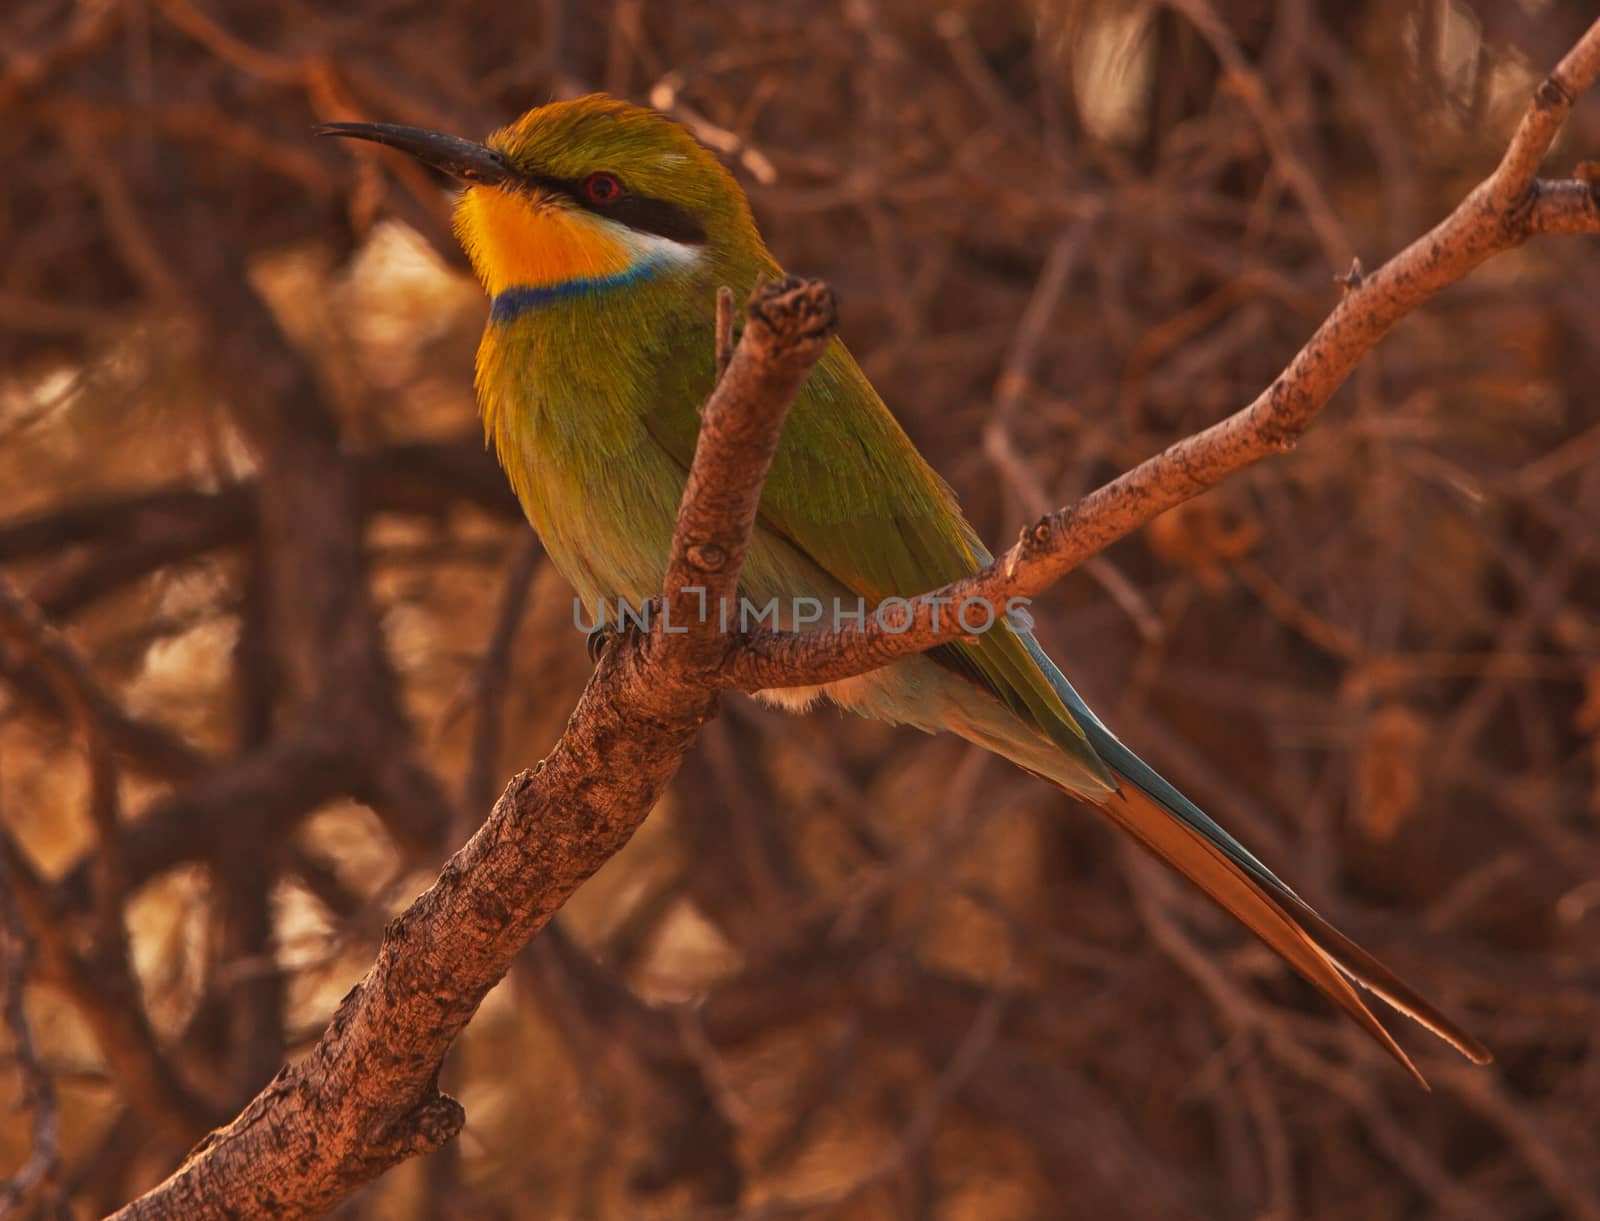 Swallow-tailed Bee-eater (Merops hirundineus) photographed in the Kgaligadi Transfrontier Park, Southern Africa.